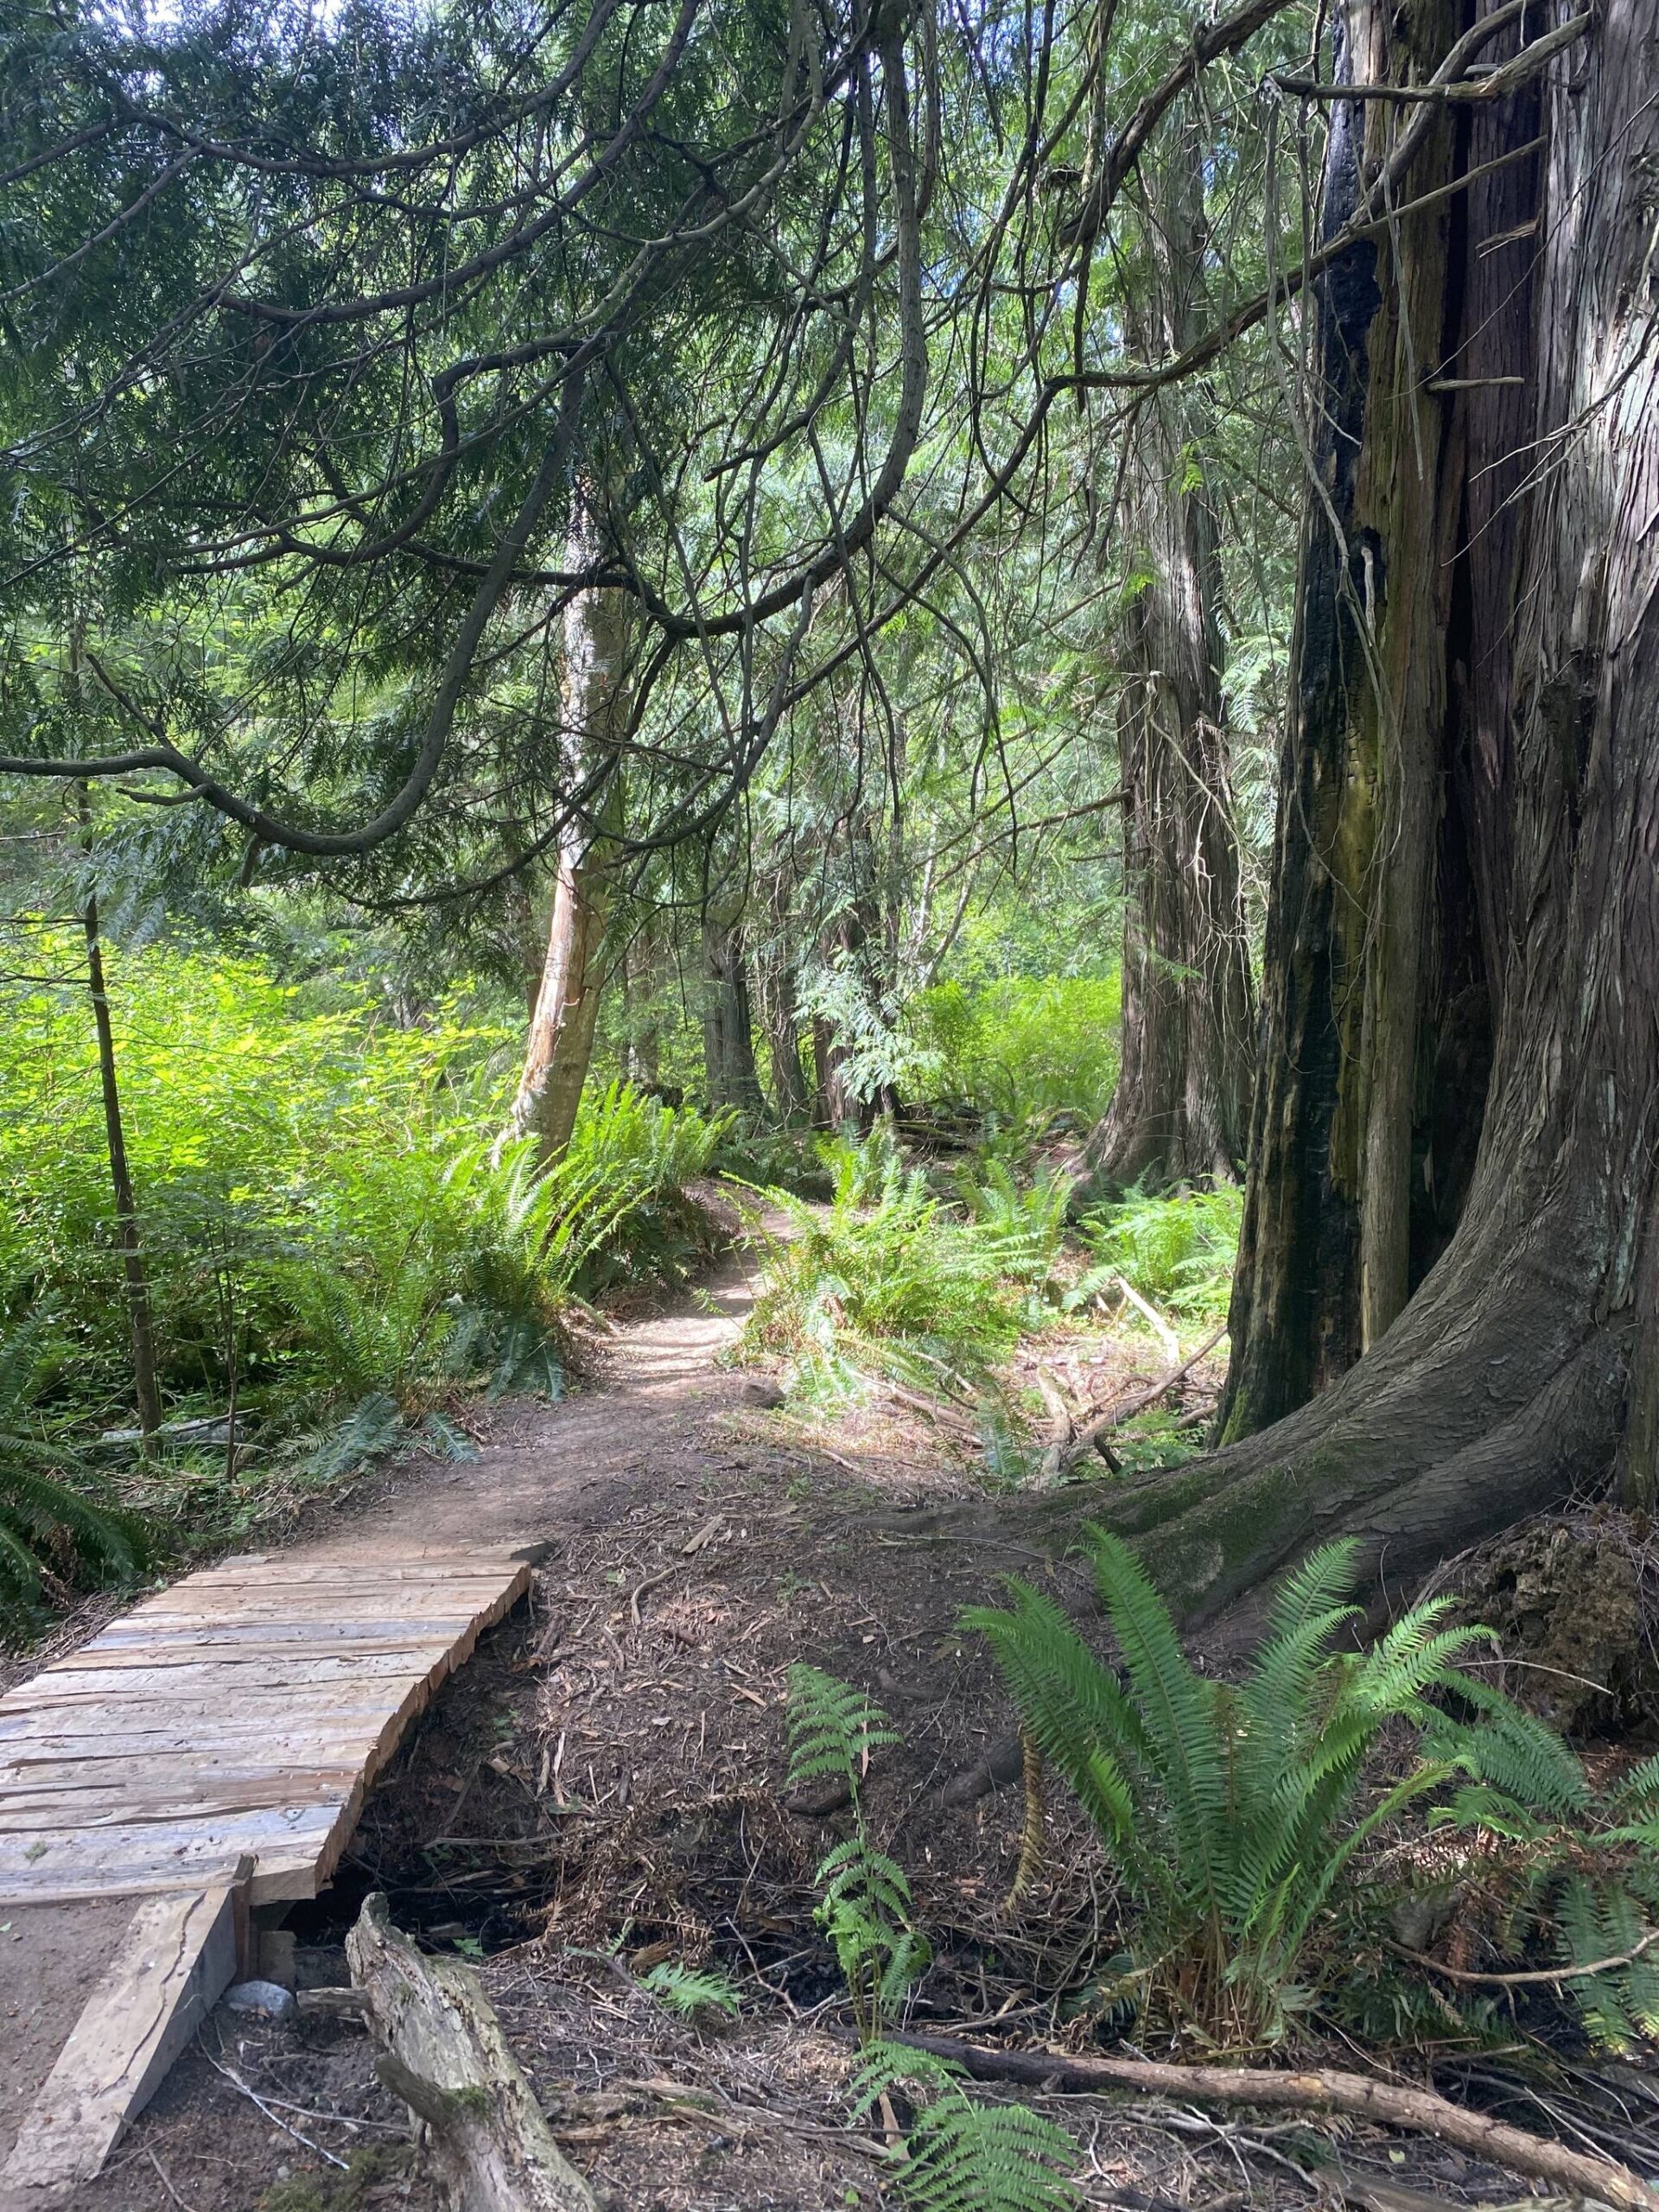 Staff photo / Isabel Ashley
The new trail connects the trailhead at Three Corner Lake road to the Roche Harbor Highlands as well as Mitchell Hill and English Camp, allowing hikers to walk all the way from Roche Harbor to Cady Mountain for the first time